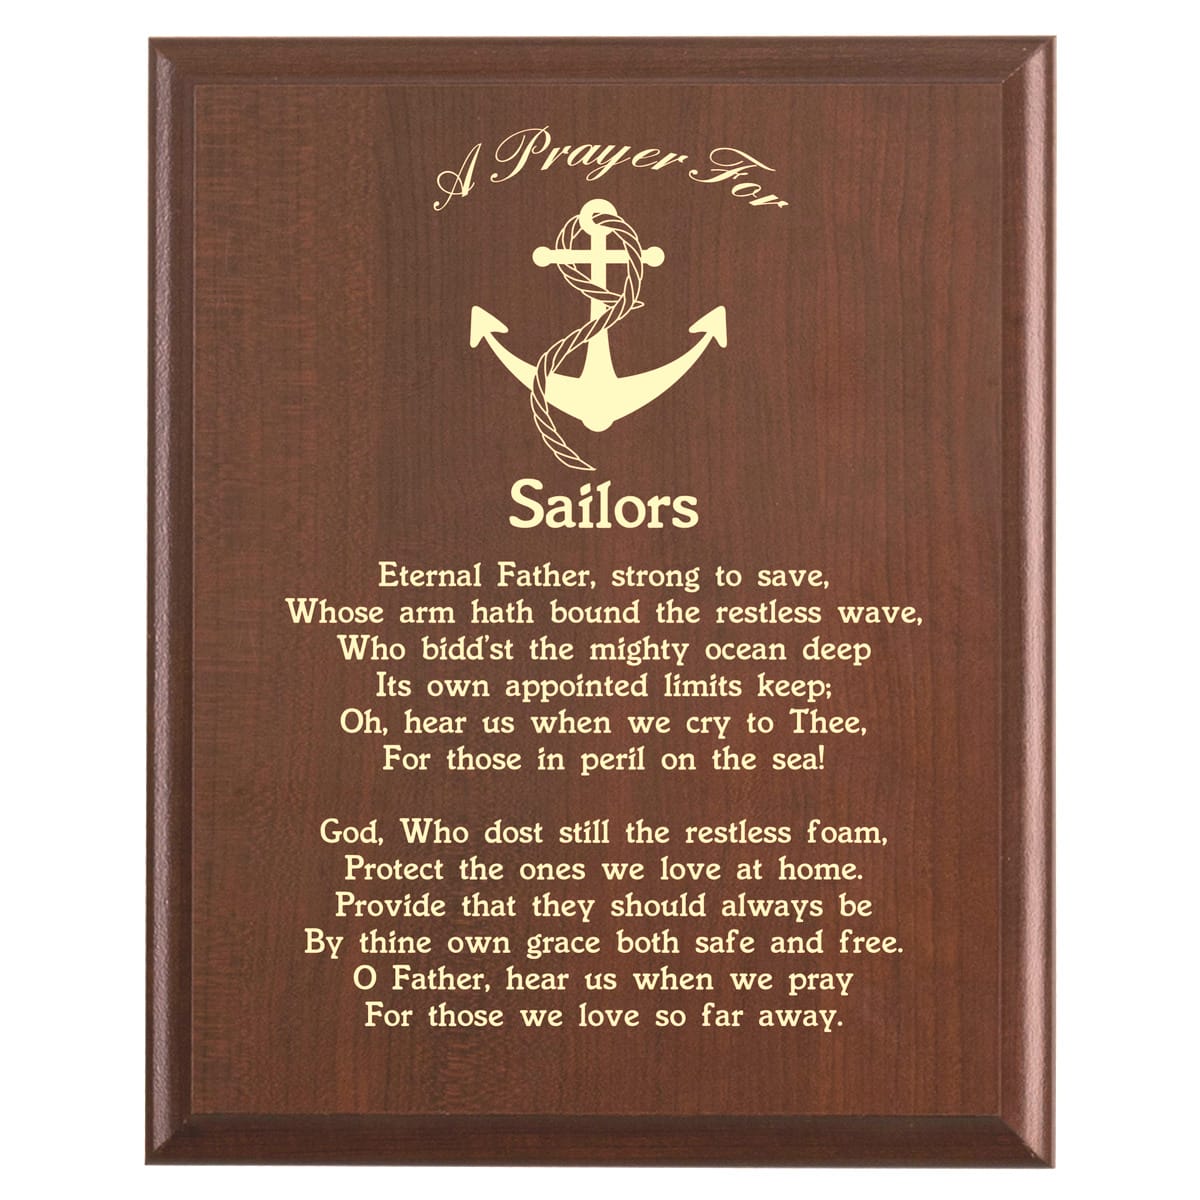 Plaque photo: Designed for Boat Owners with free personalization. Wood style finish with customized text.